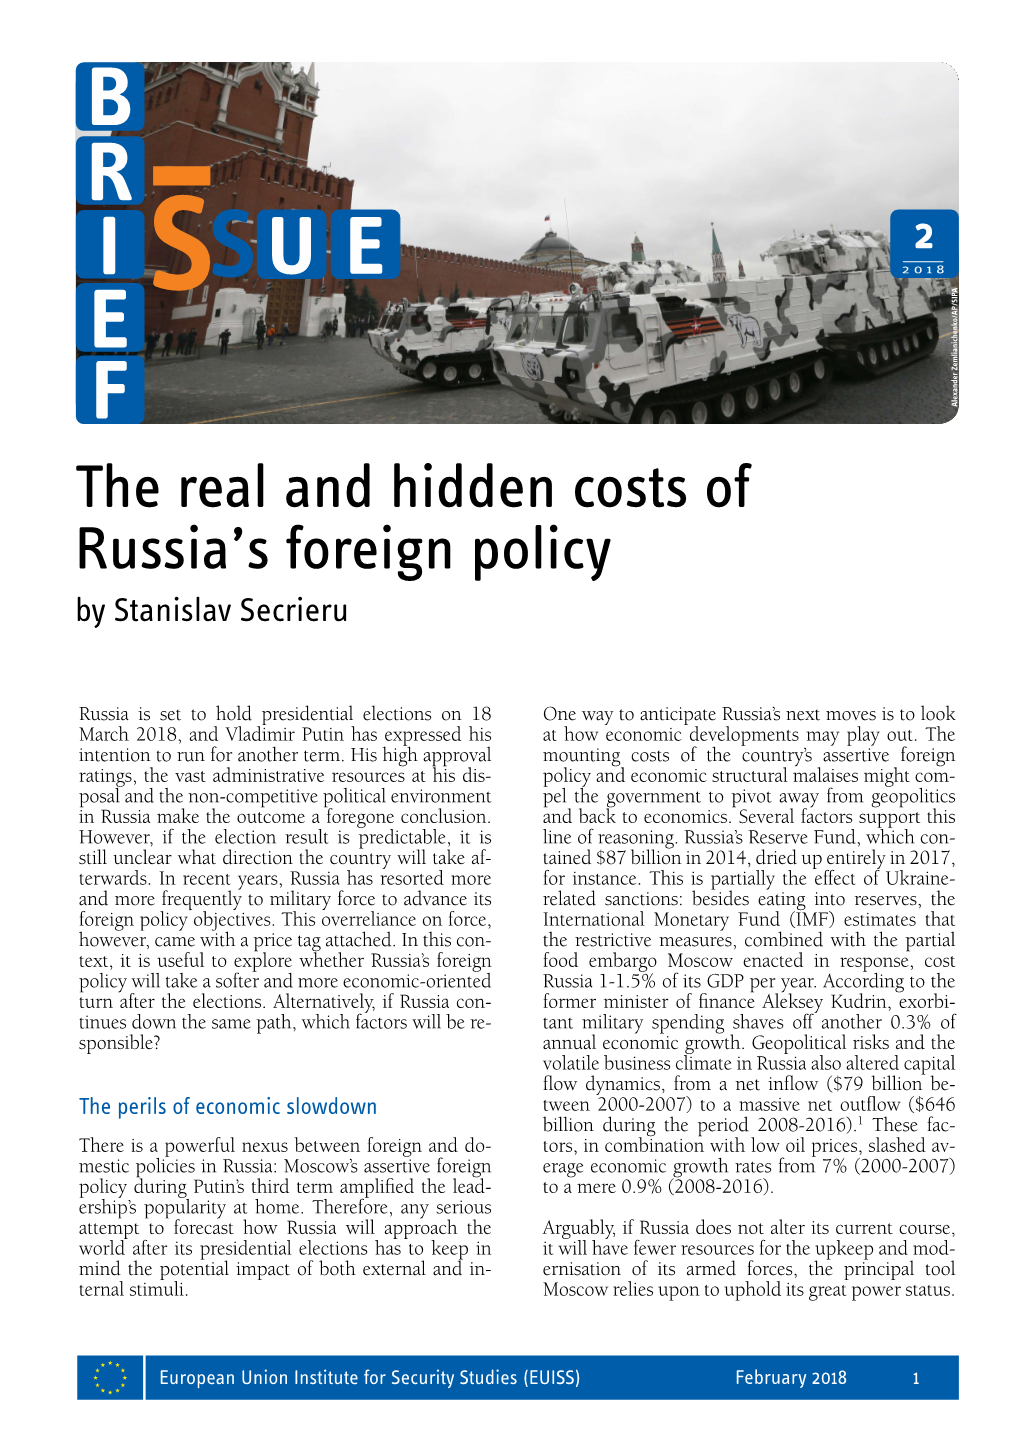 The Real and Hidden Costs of Russia's Foreign Policy